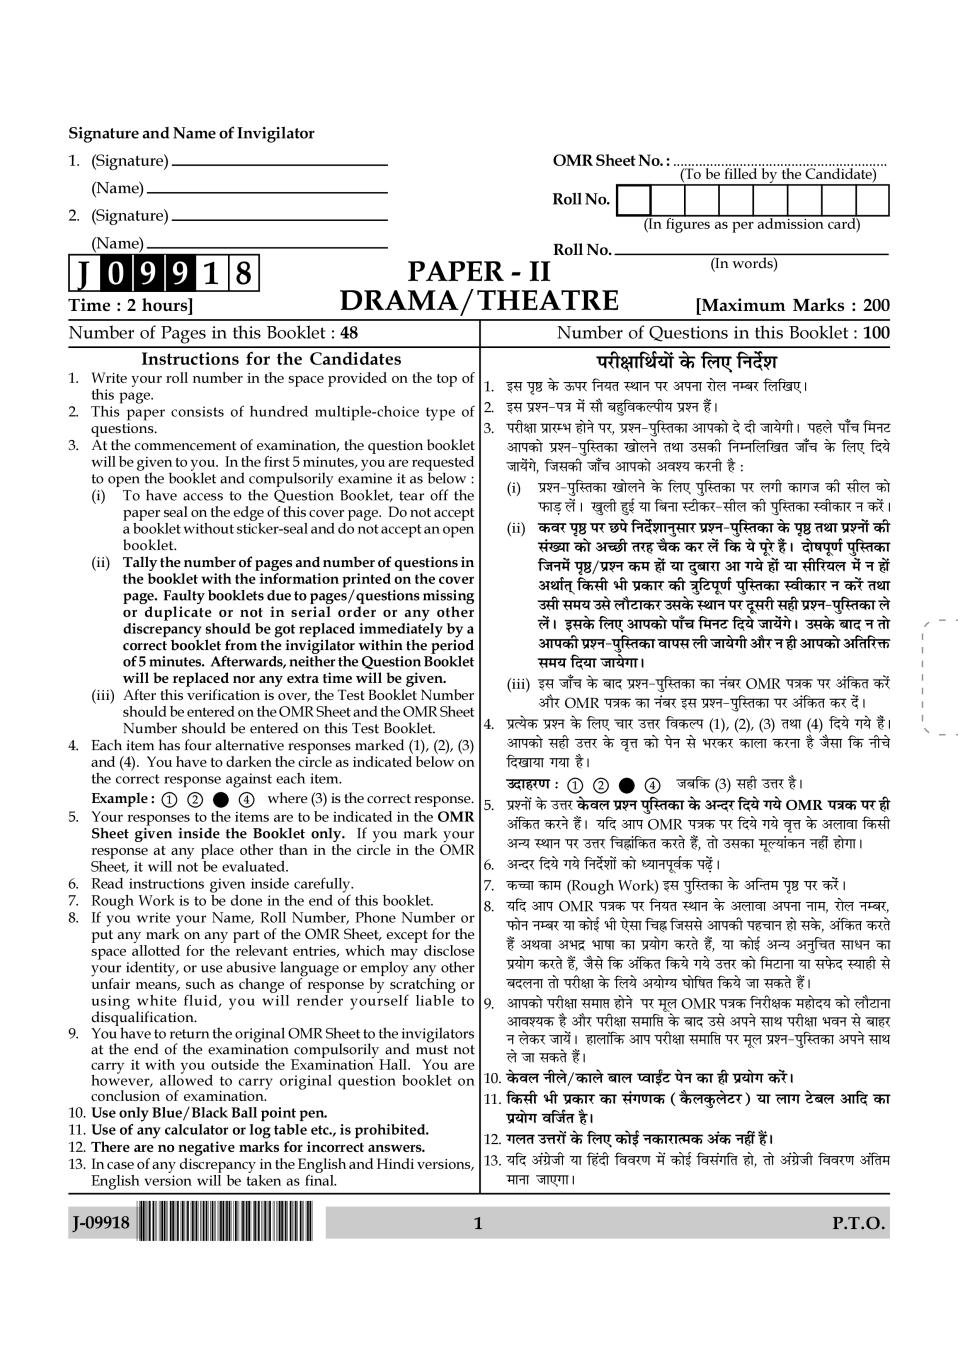 UGC NET Drama Theatre Question Paper 2018 - Page 1